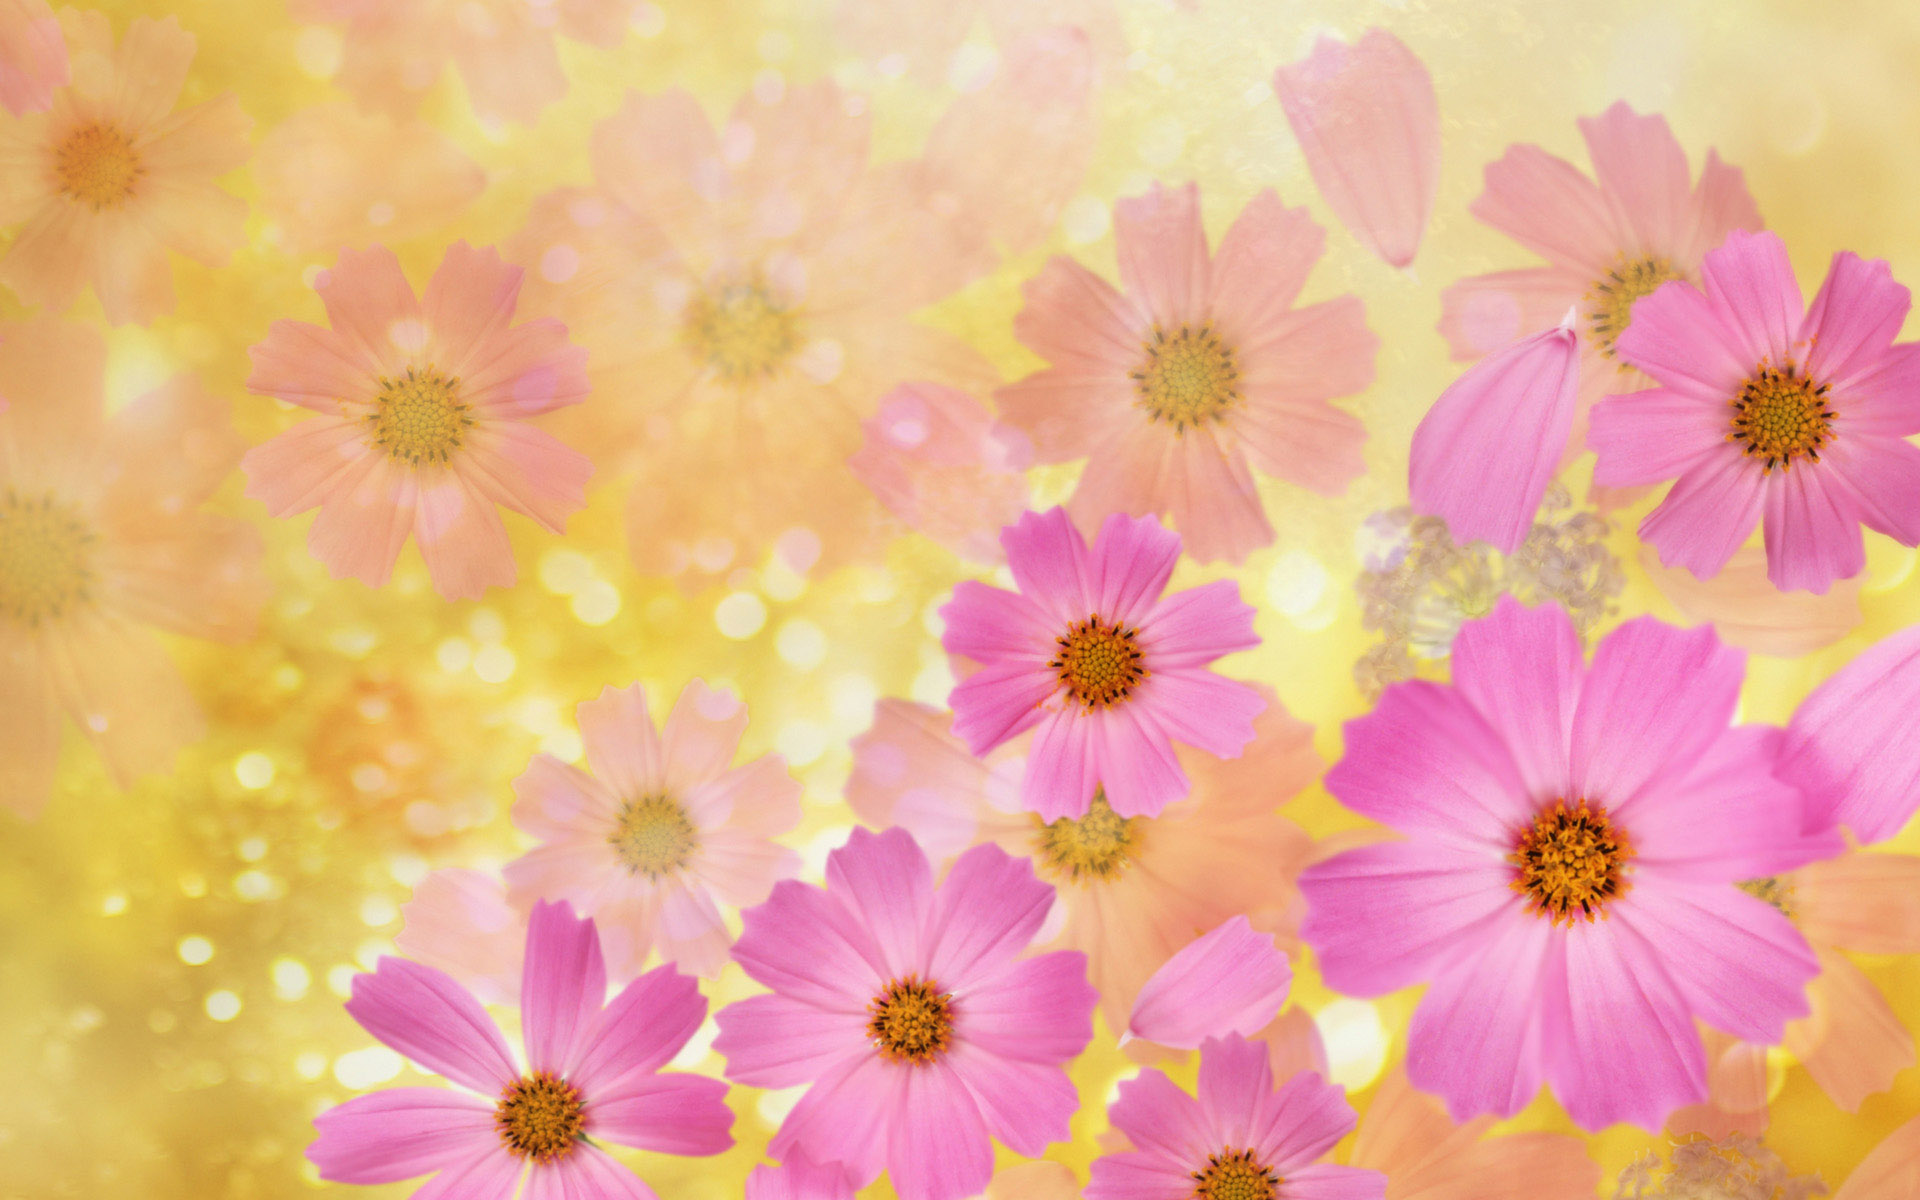 flowers Wallpaper and make this wallpaper for your desktop tablet